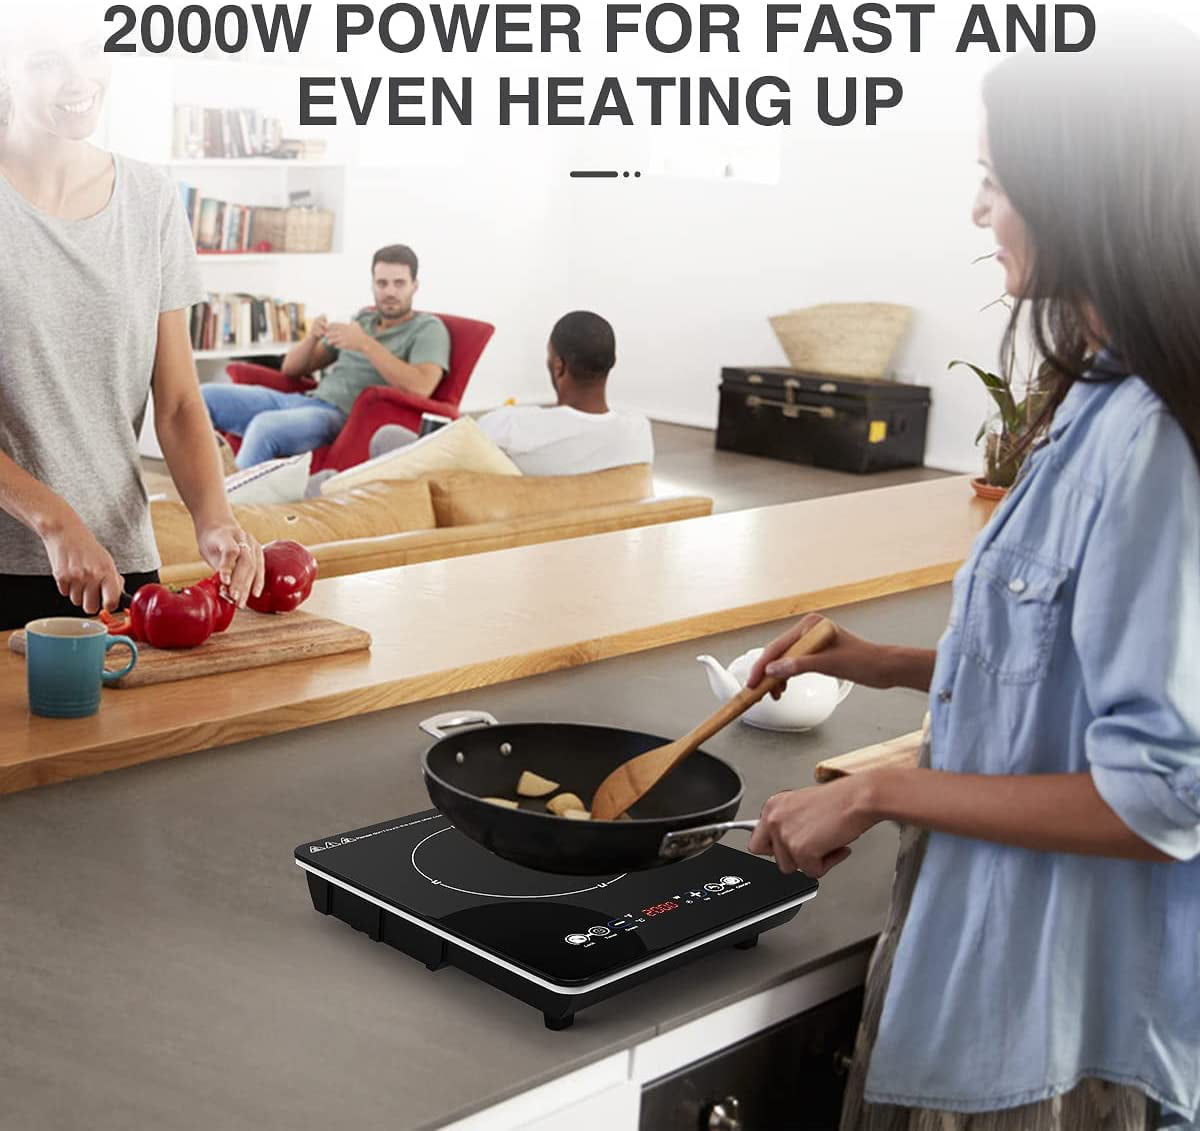 VBGK Electric Cooktop Single Burner 1800W 110v,Electric Stove Top Plug in  Electric Burner Countertop Hot Plate for Cooking,4H & Auto Shutdown  Induction Burner,Child Lock Electric Cooktop 